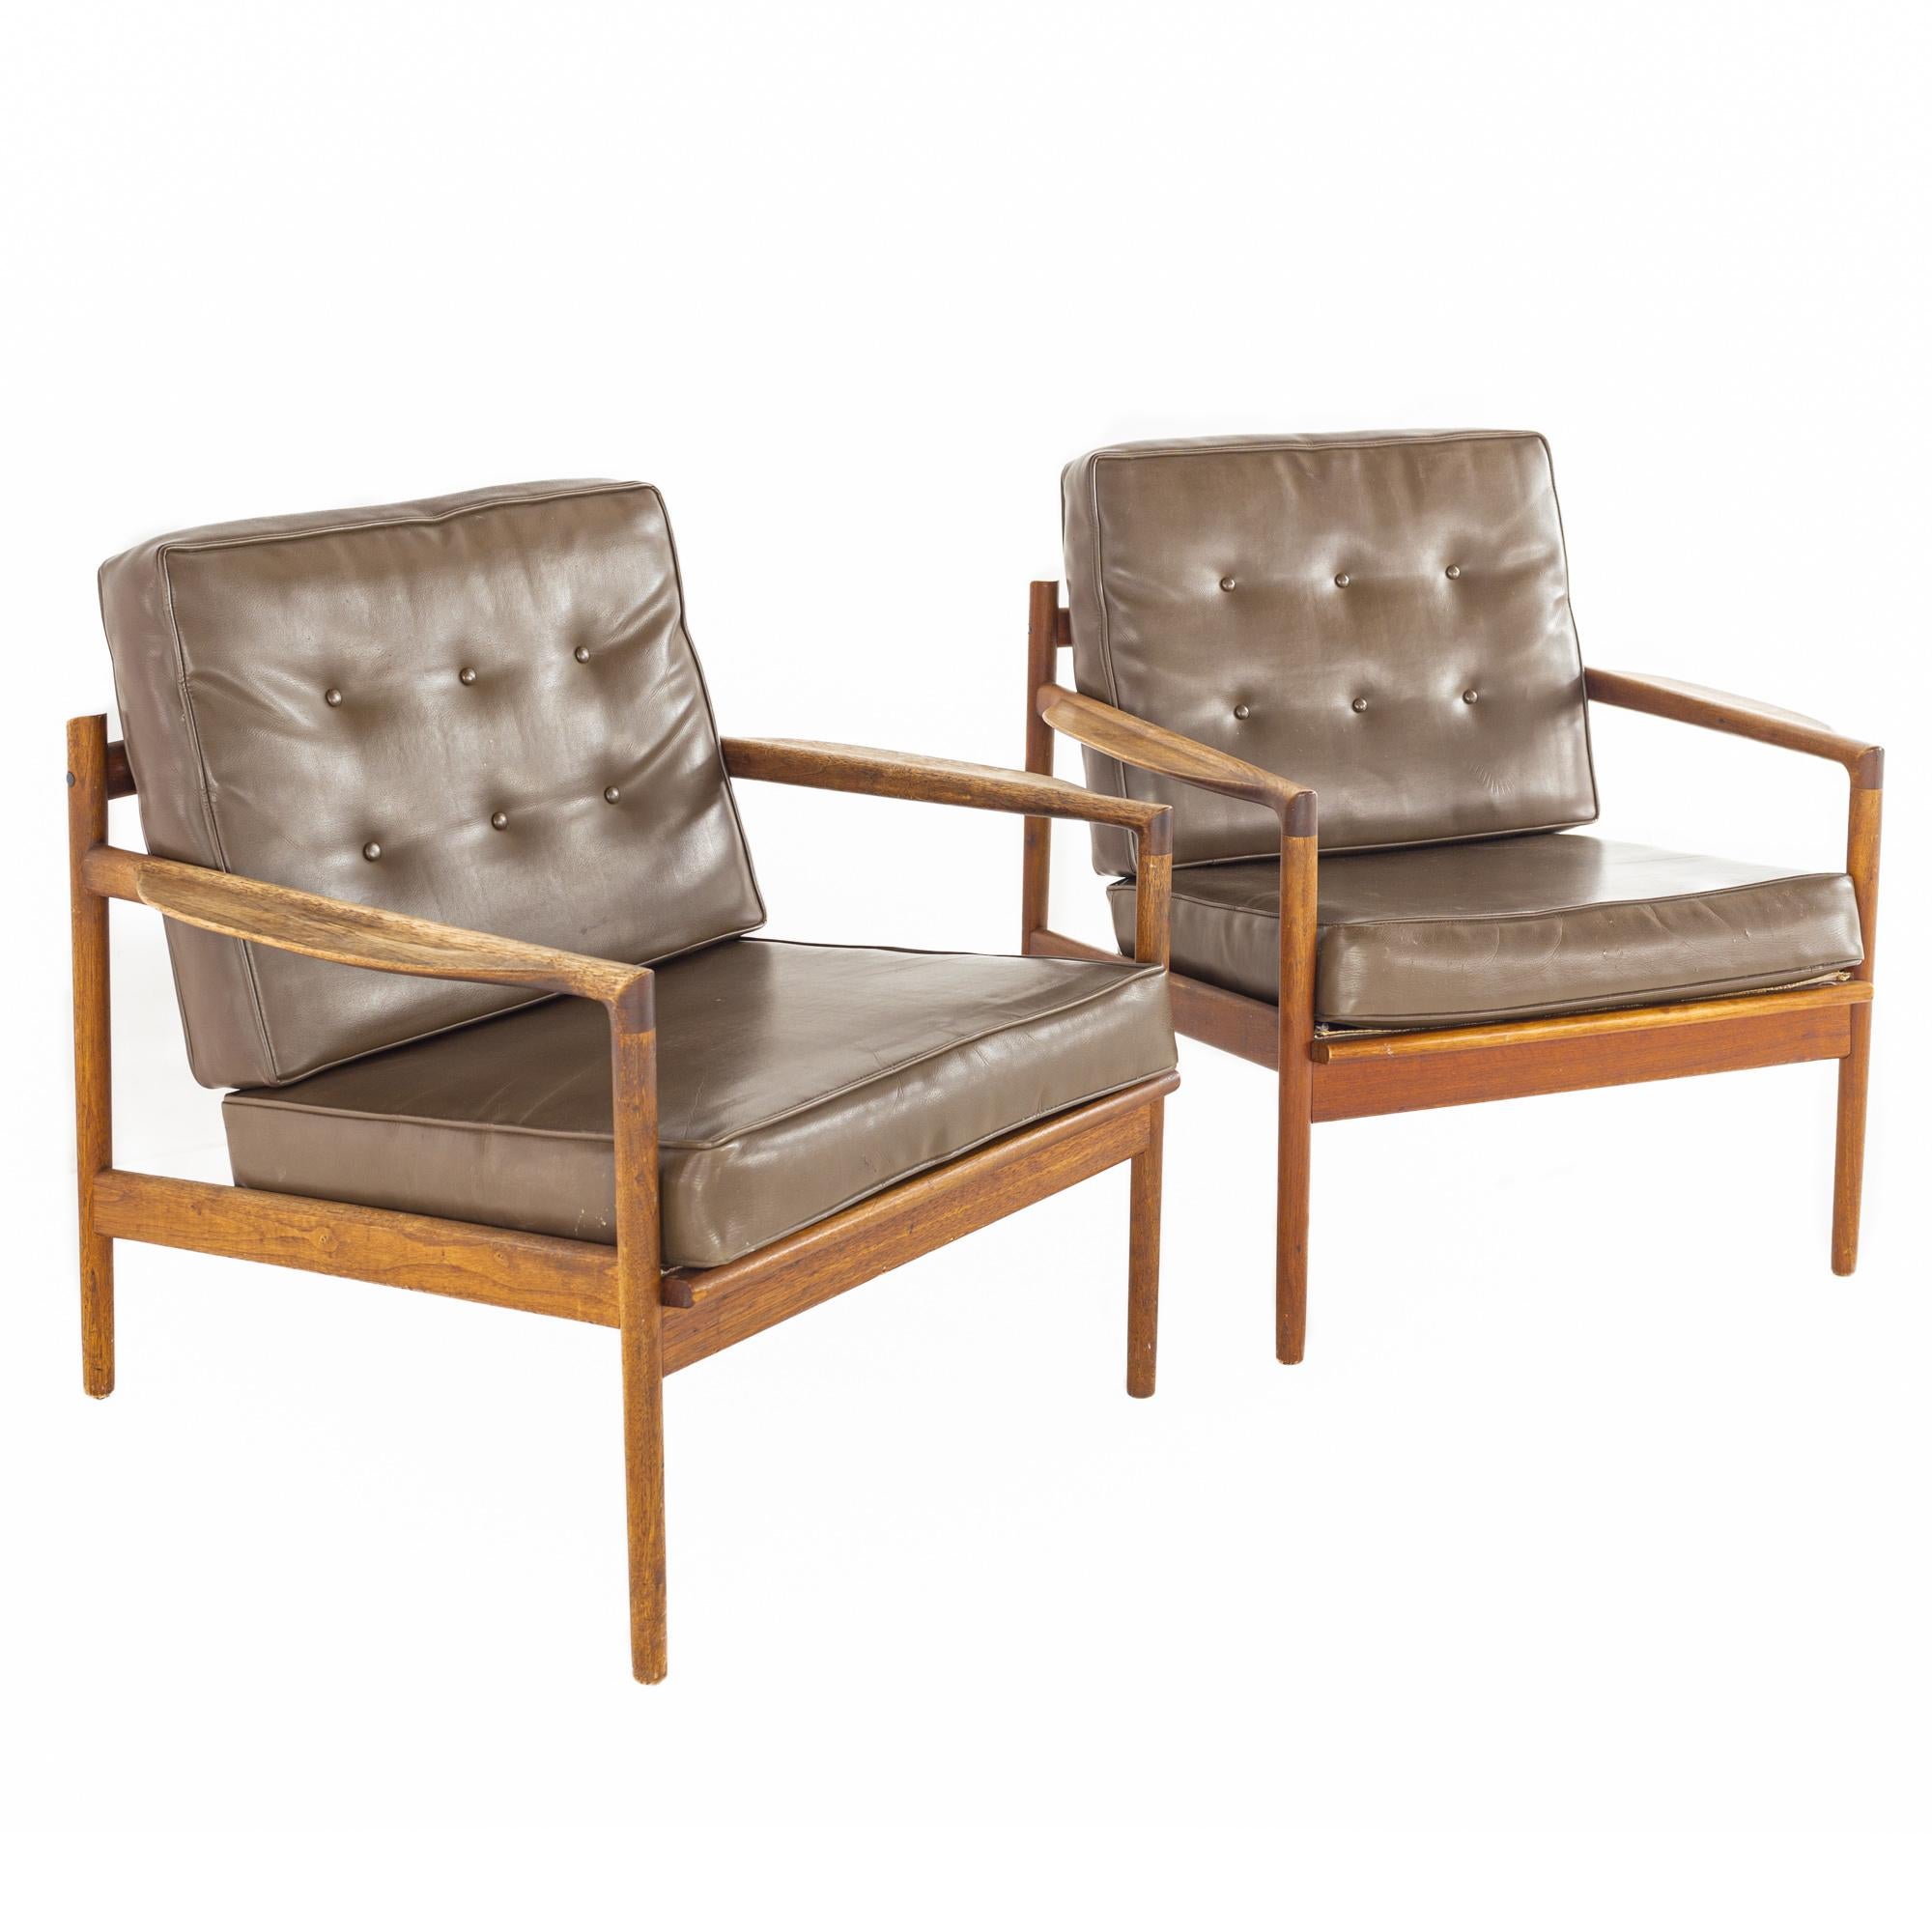 Ib Kofod Larsen for Selig mid-century walnut lounge chairs - a pair.

Each chair measures: 29.75 wide x 29 deep x 28.5 high, with a seat height of 16 and arm height of 21 inches.

All pieces of furniture can be had in what we call restored